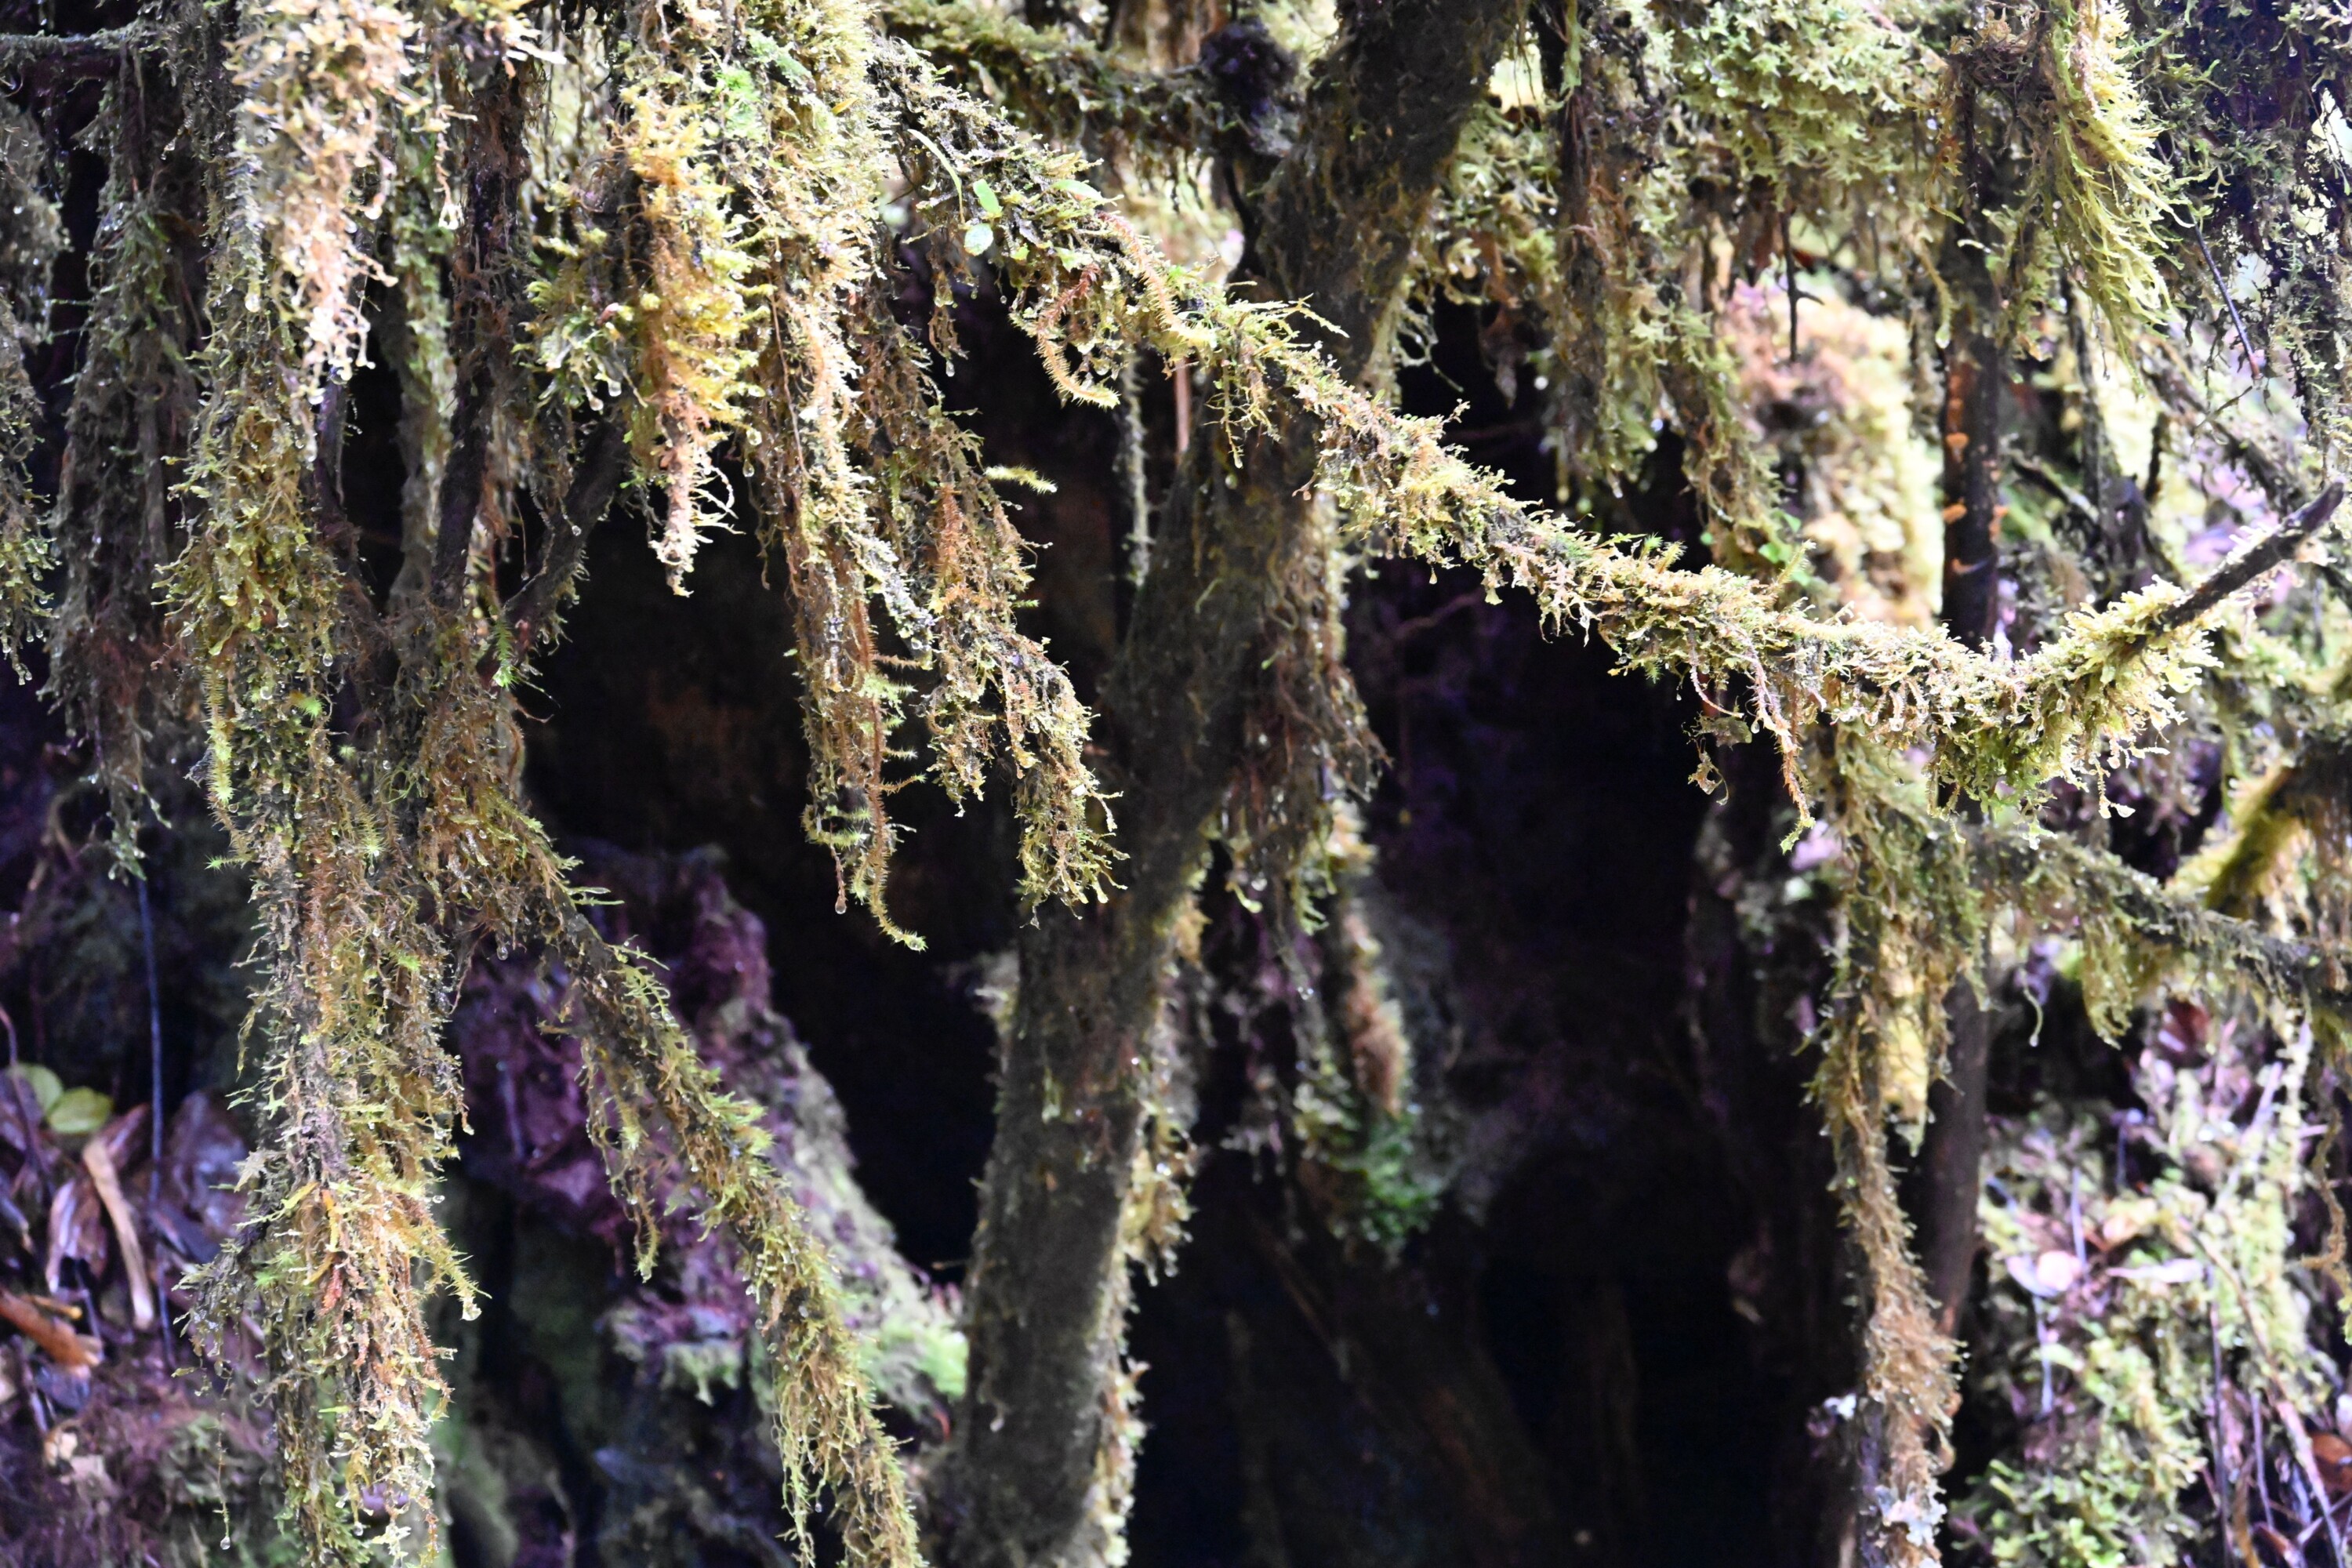 Moss-covered branches in the cloud forest of Parque Nacional Los Quetzales, Costa Rica